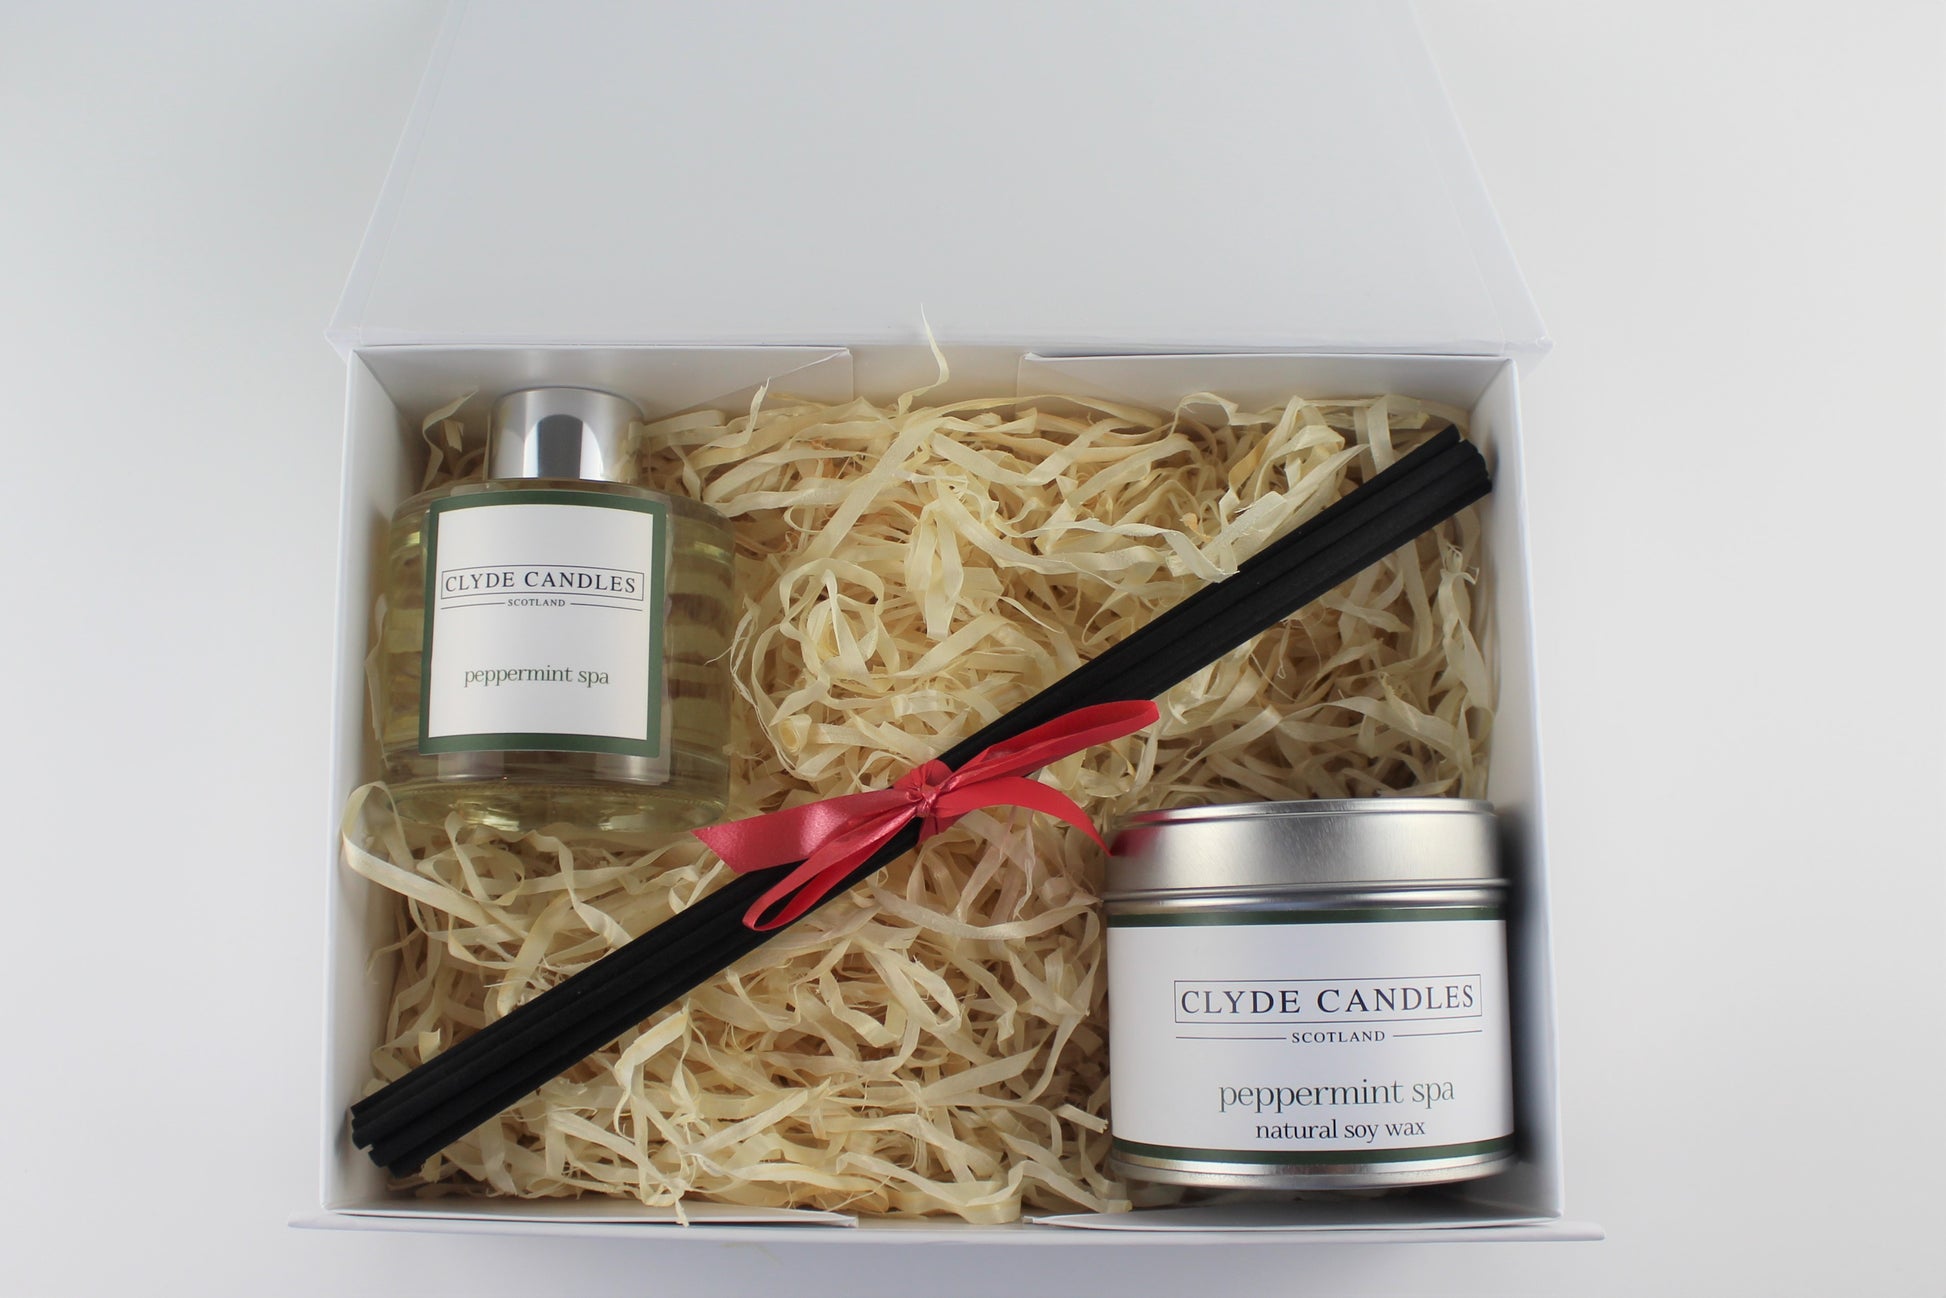 Peppermint Spa Diffuser & Candle Gift Box Set - Scottish Natural Soy Candle